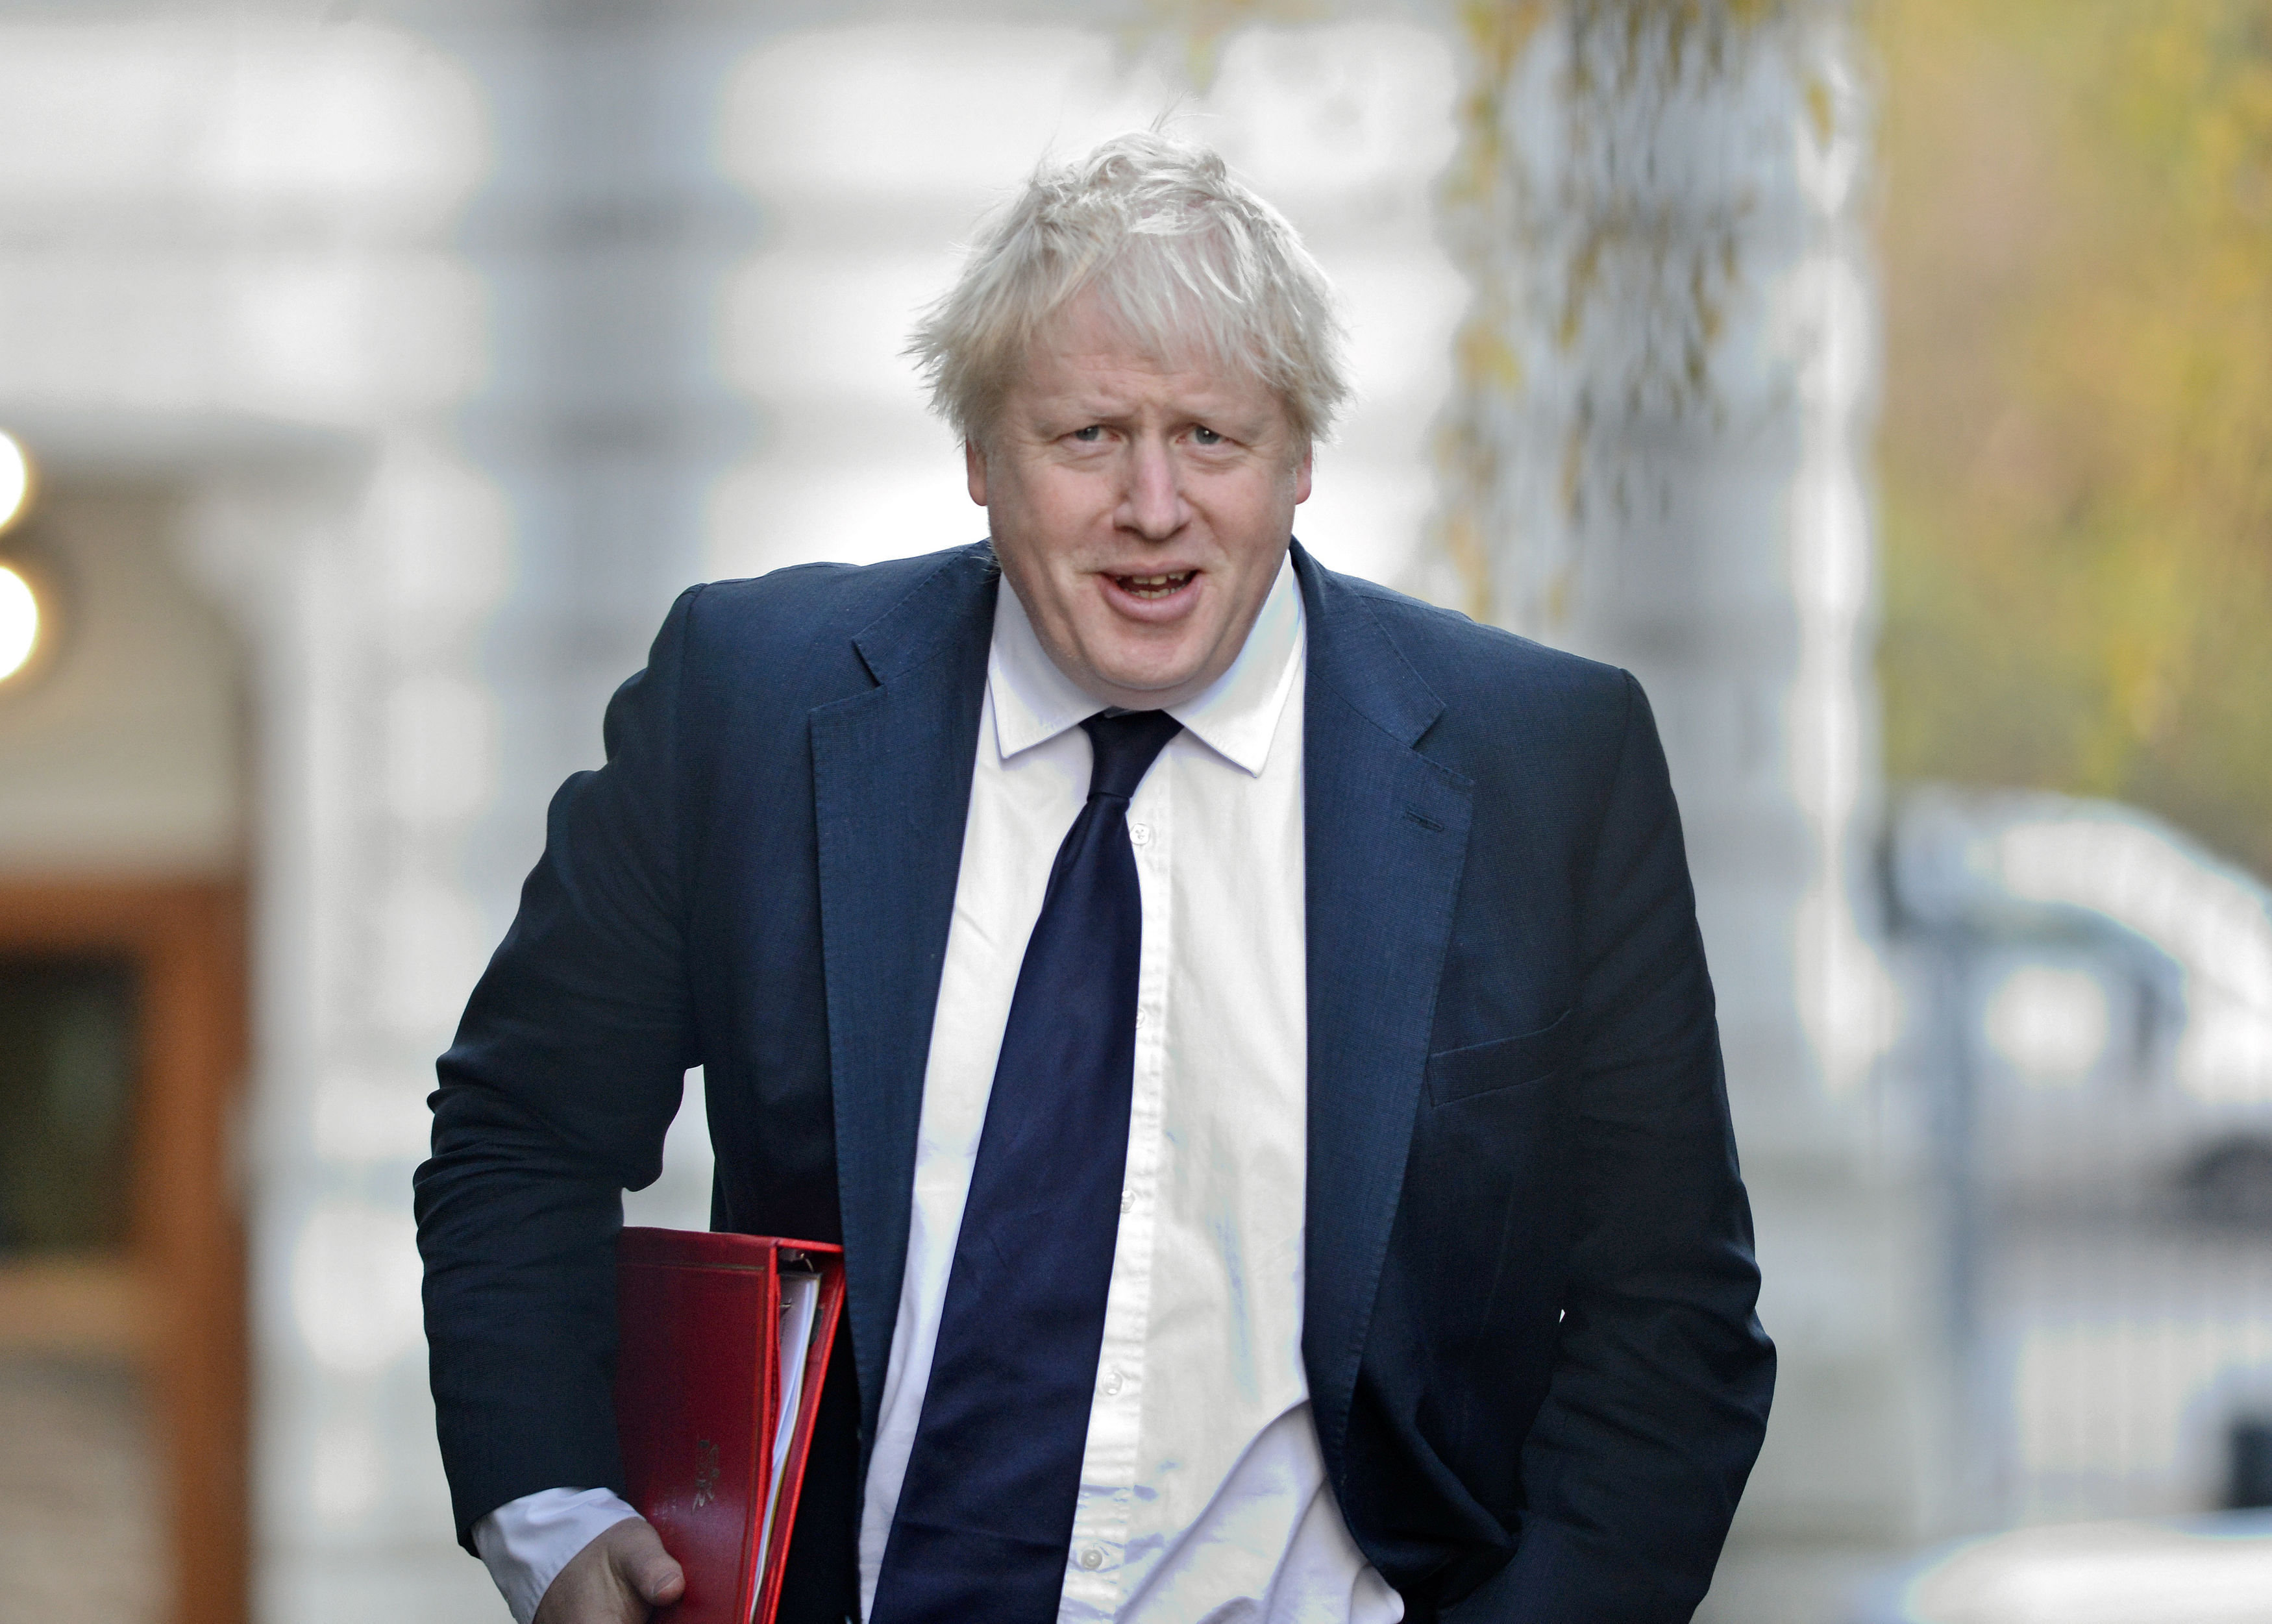 Boris Johnson's seat could be at risk